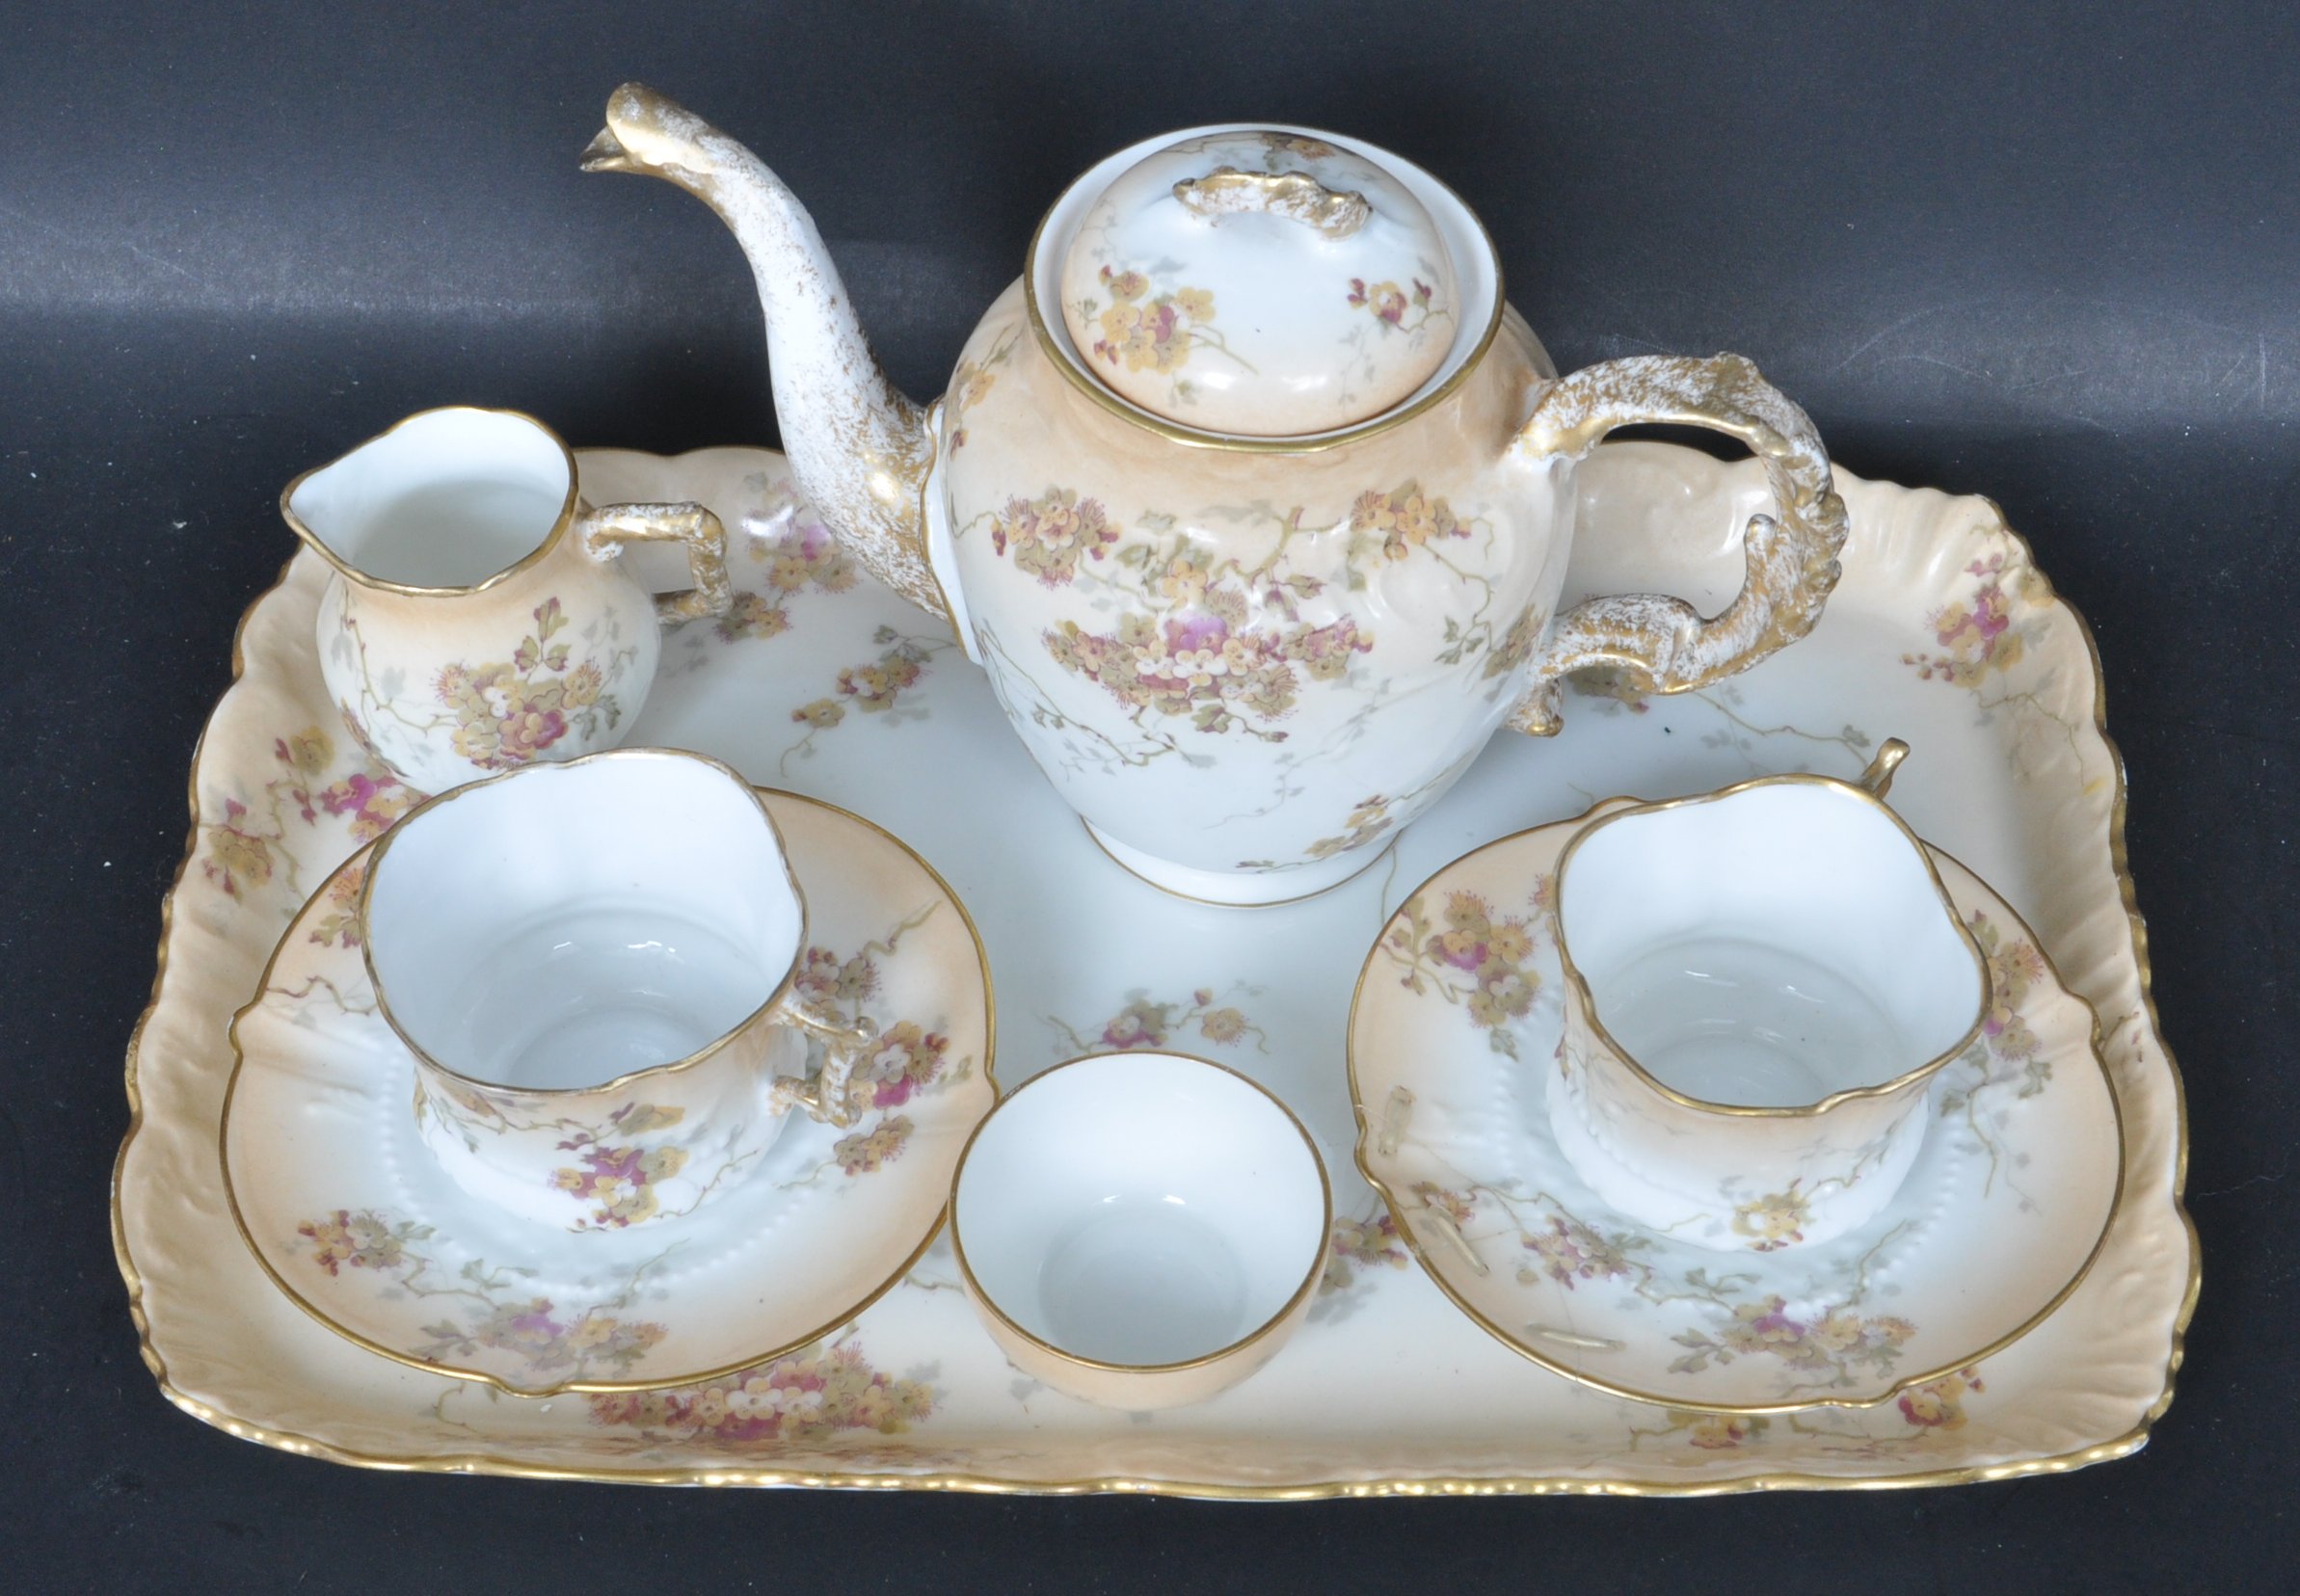 CIRCA 1900 LIMOGES 'TEA FOR TWO' CHINA SERVICE - Image 2 of 6